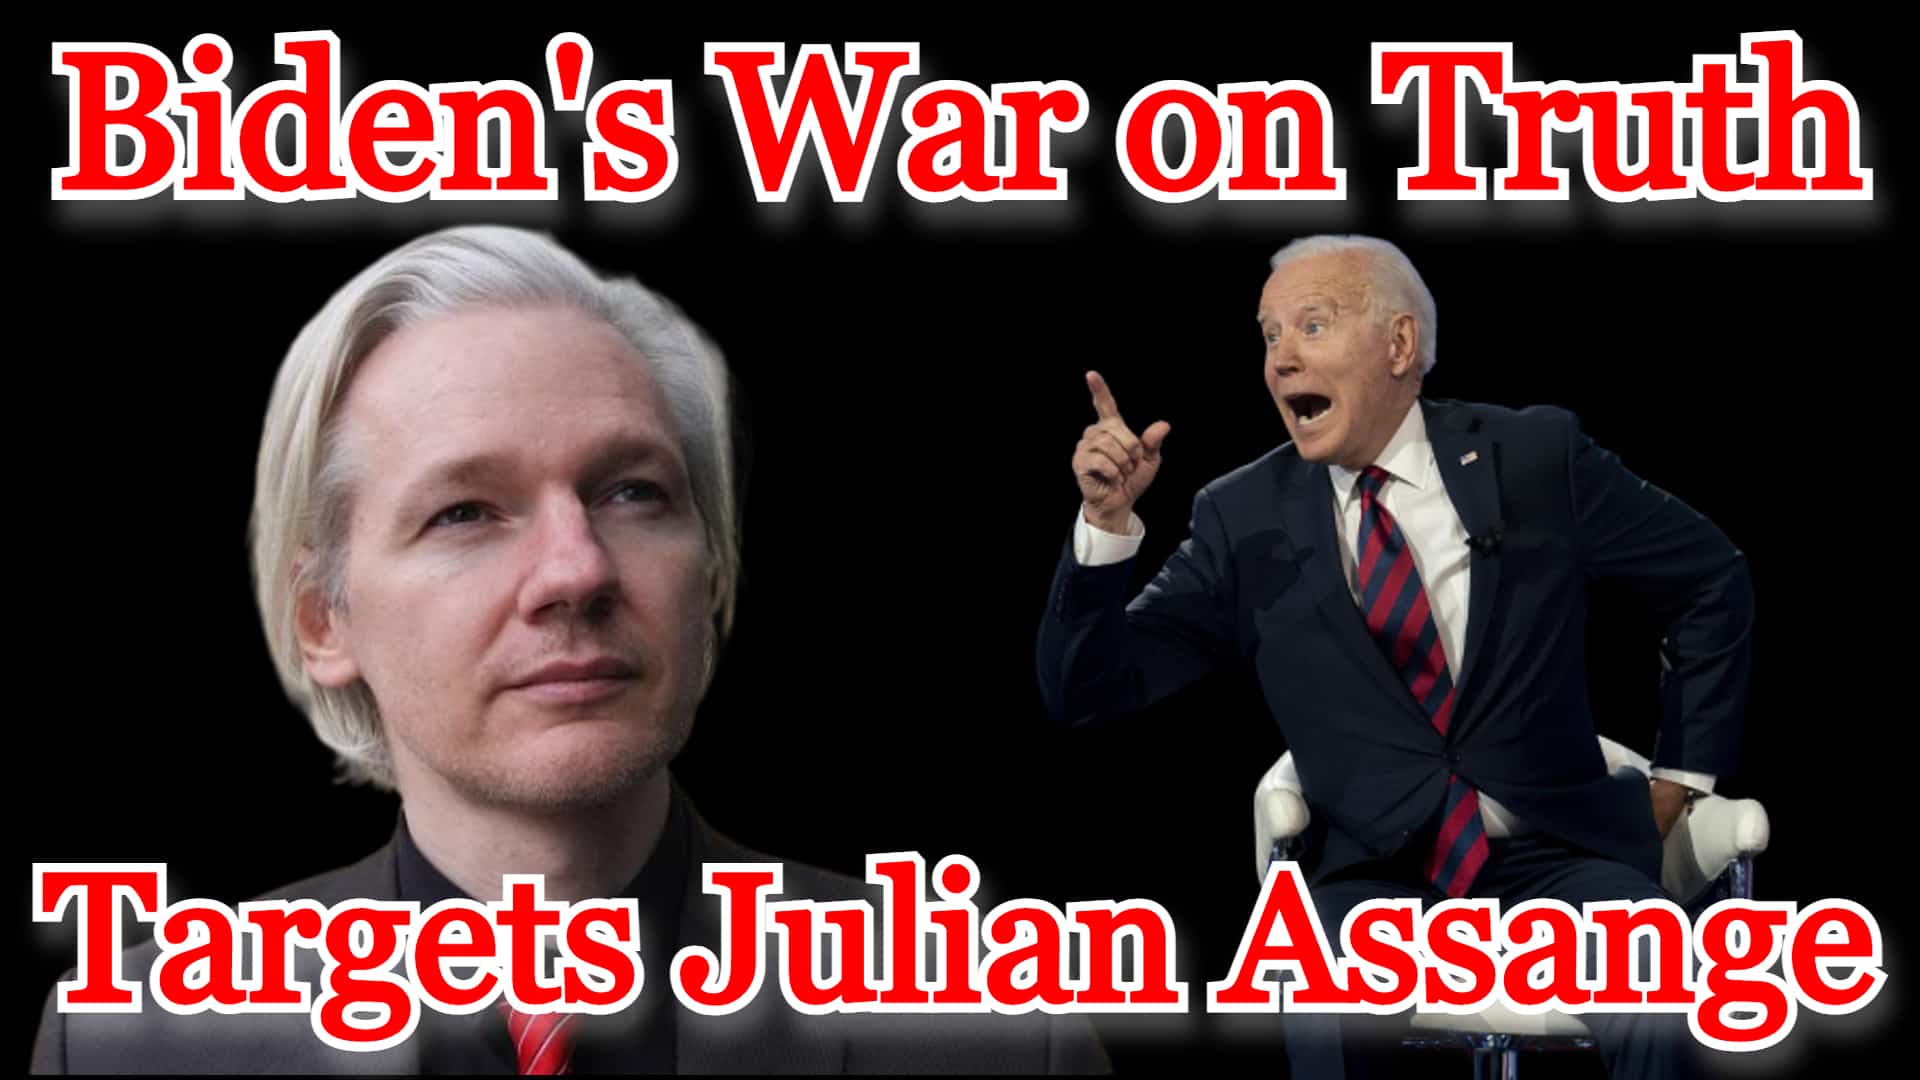 COI #182: Biden Targets the Truth with Assange Prosecution